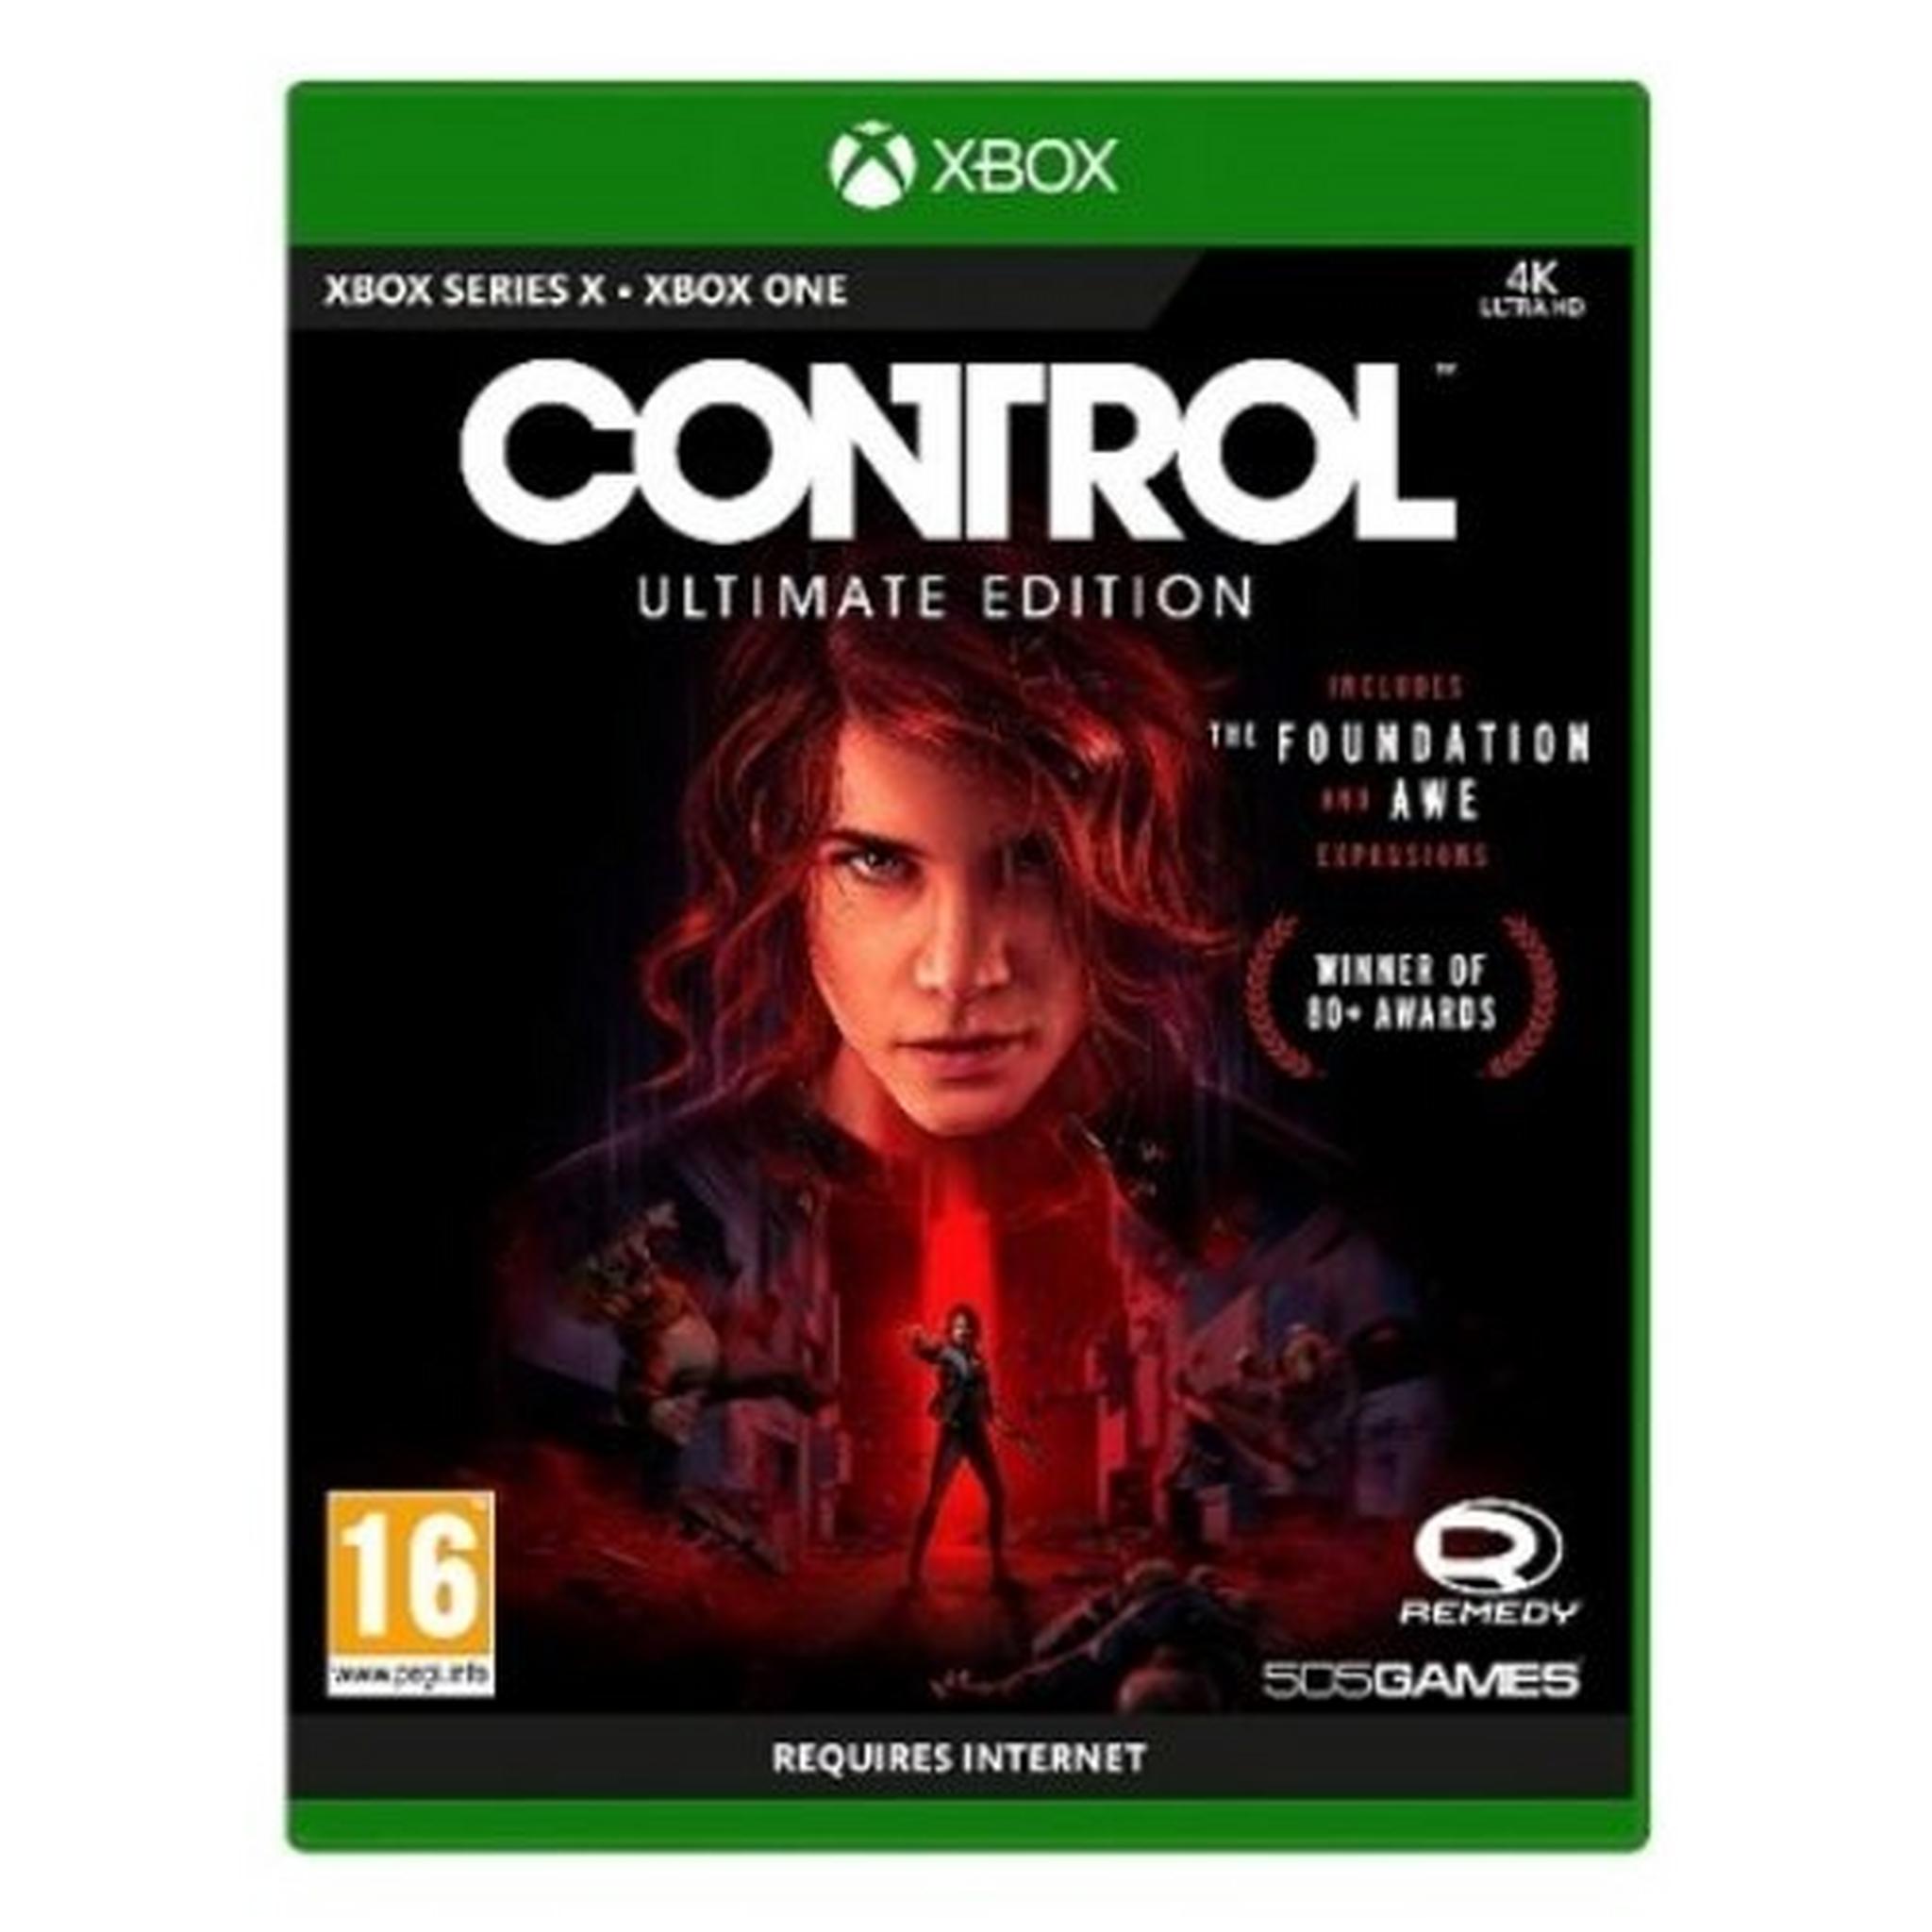 Control Ultimate Edition - Xbox Series X Game